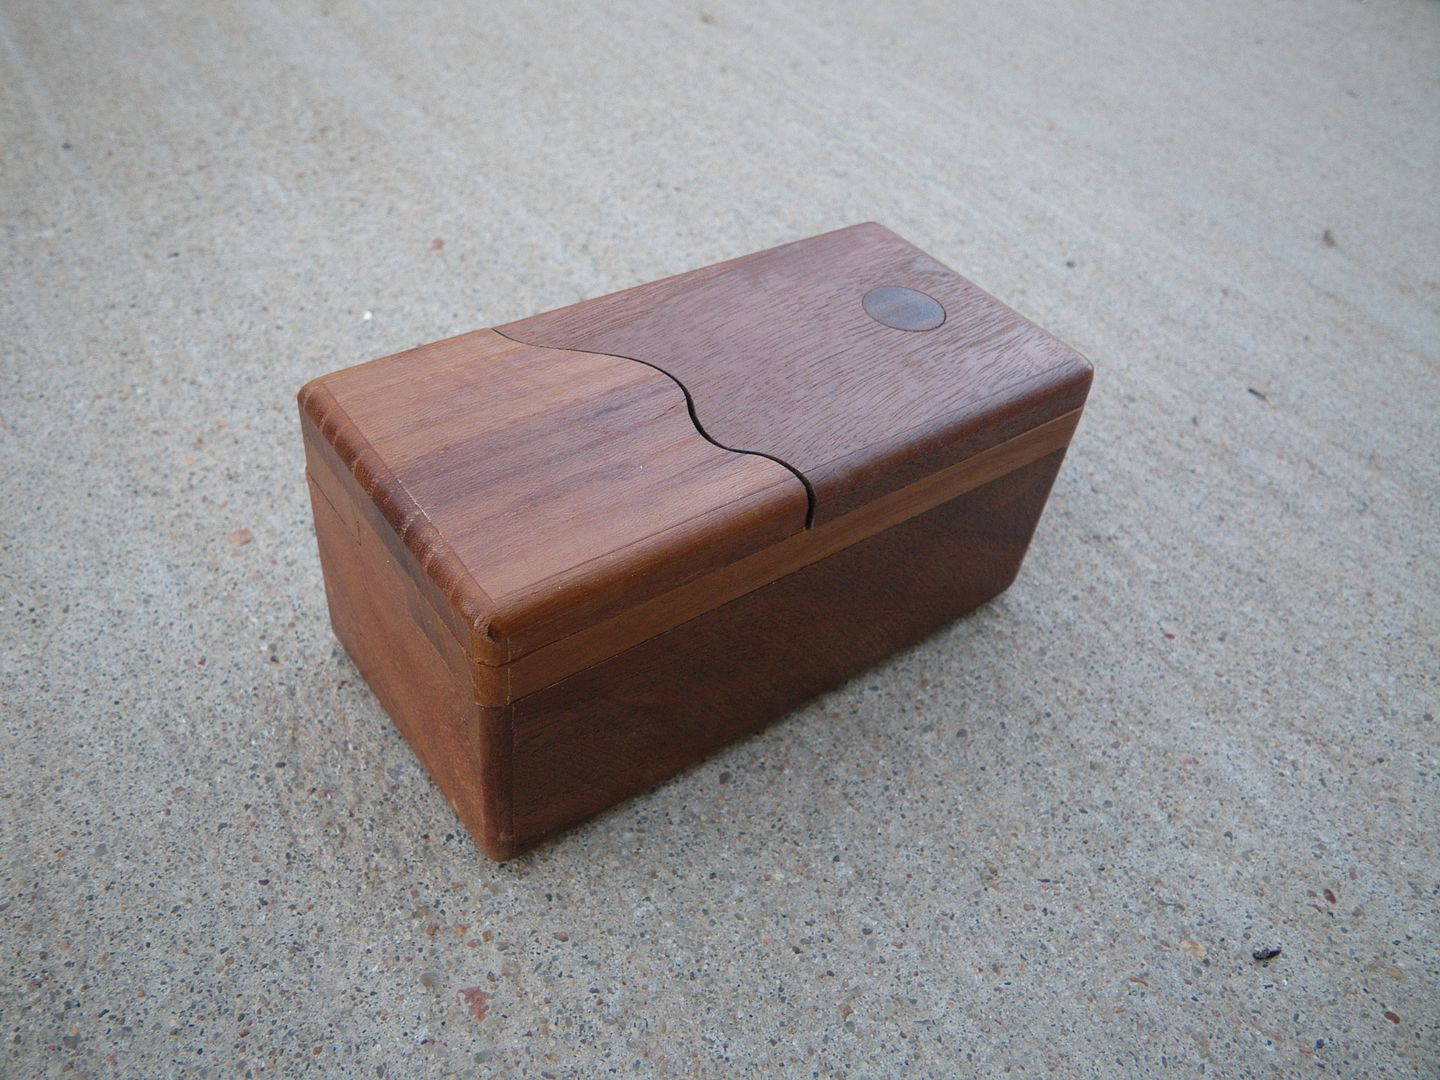 Puzzle box and Christmas ornaments